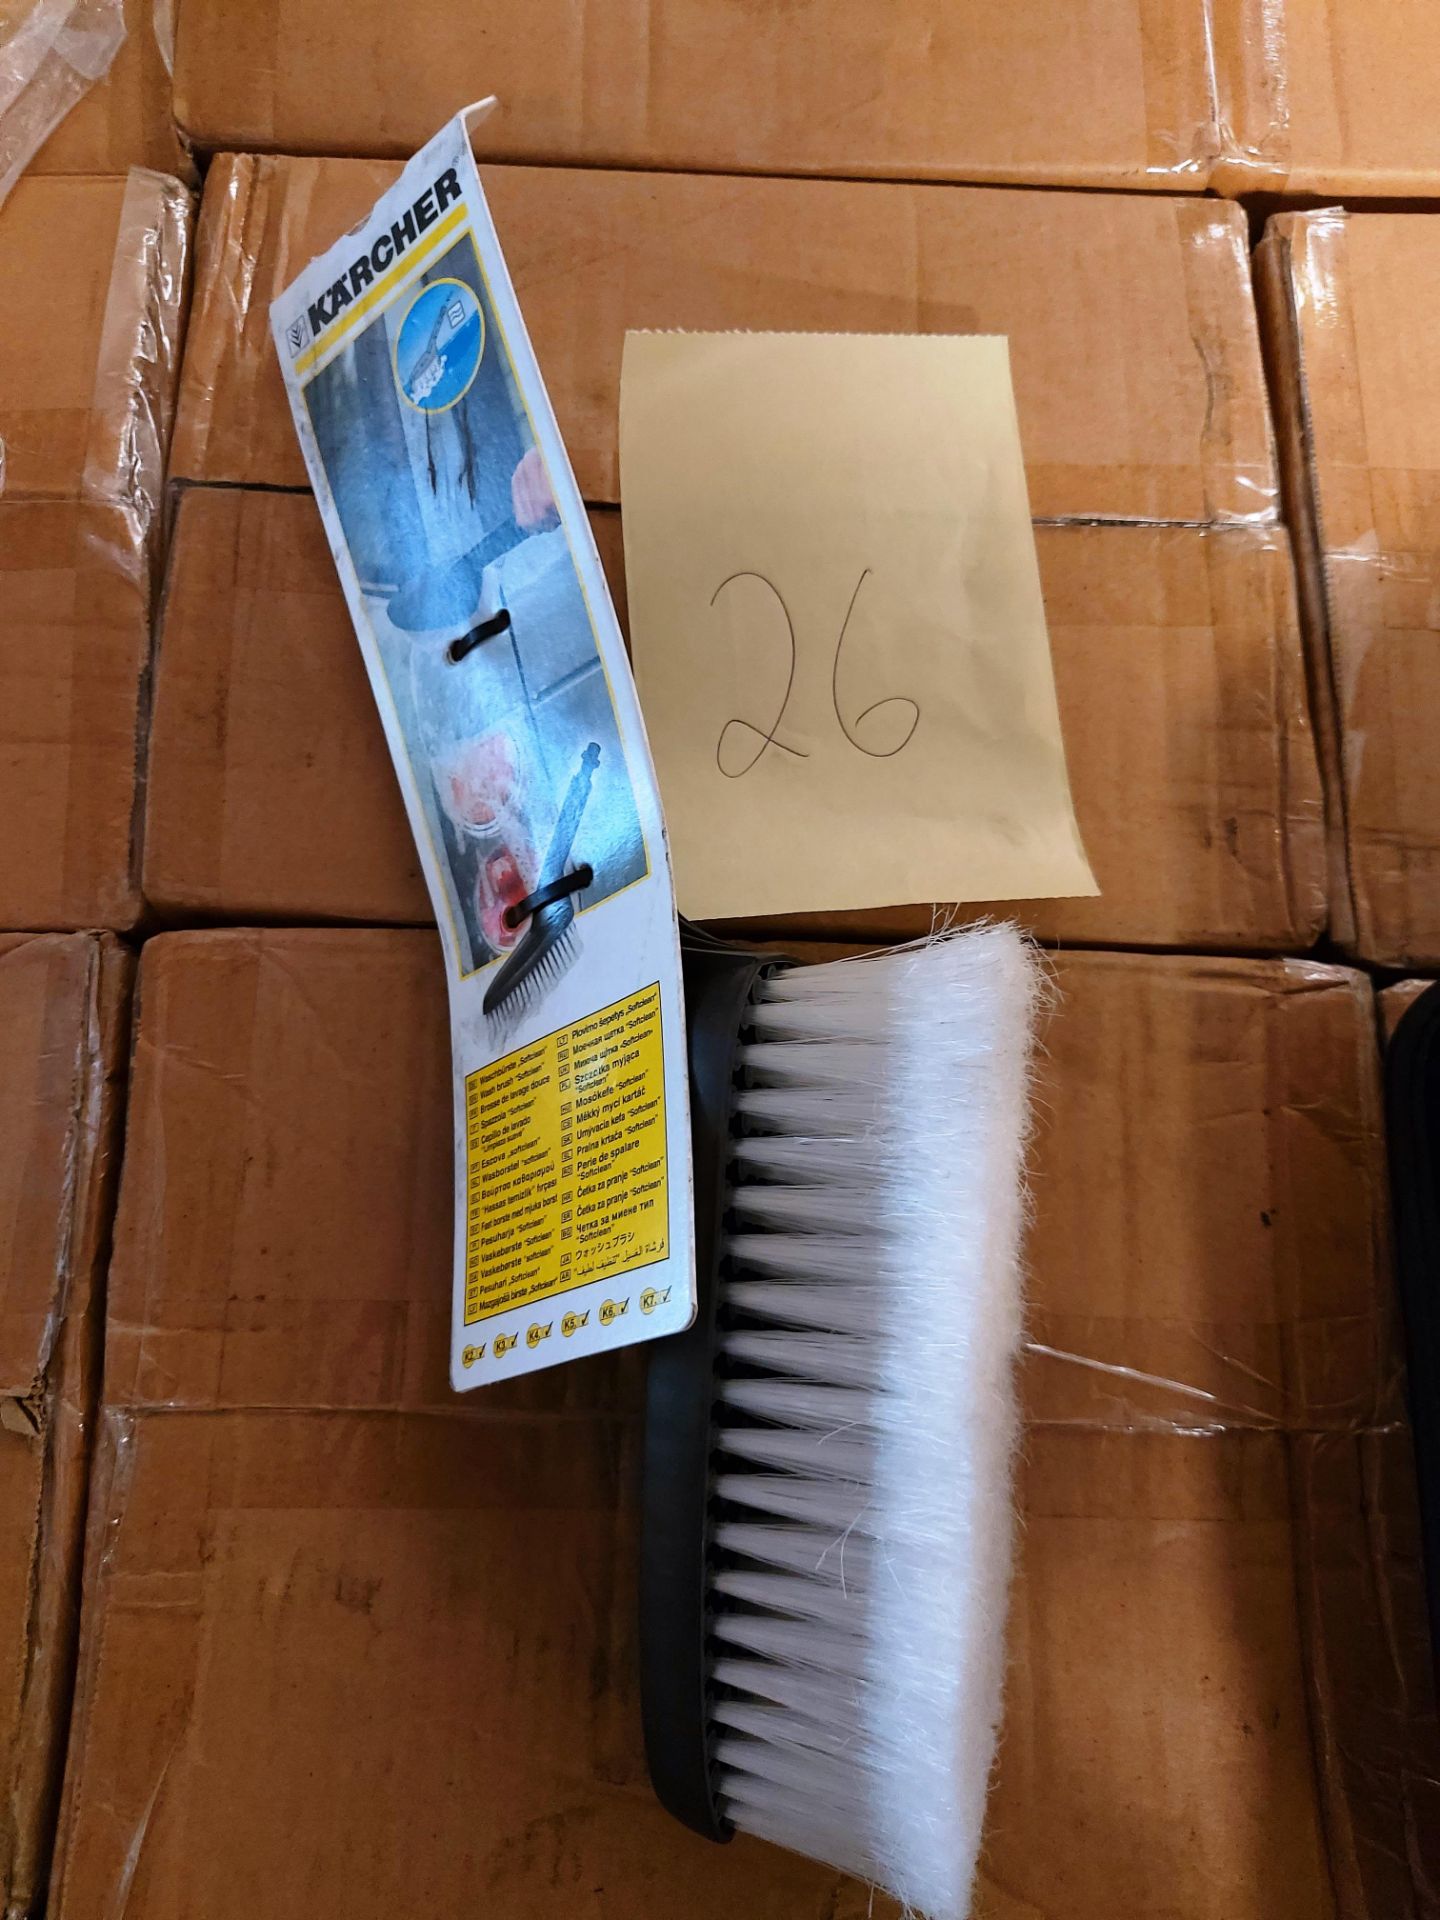 100 x Karcher car cleaning brushes brand new in original packaging - rrp £9.99 - Image 2 of 2